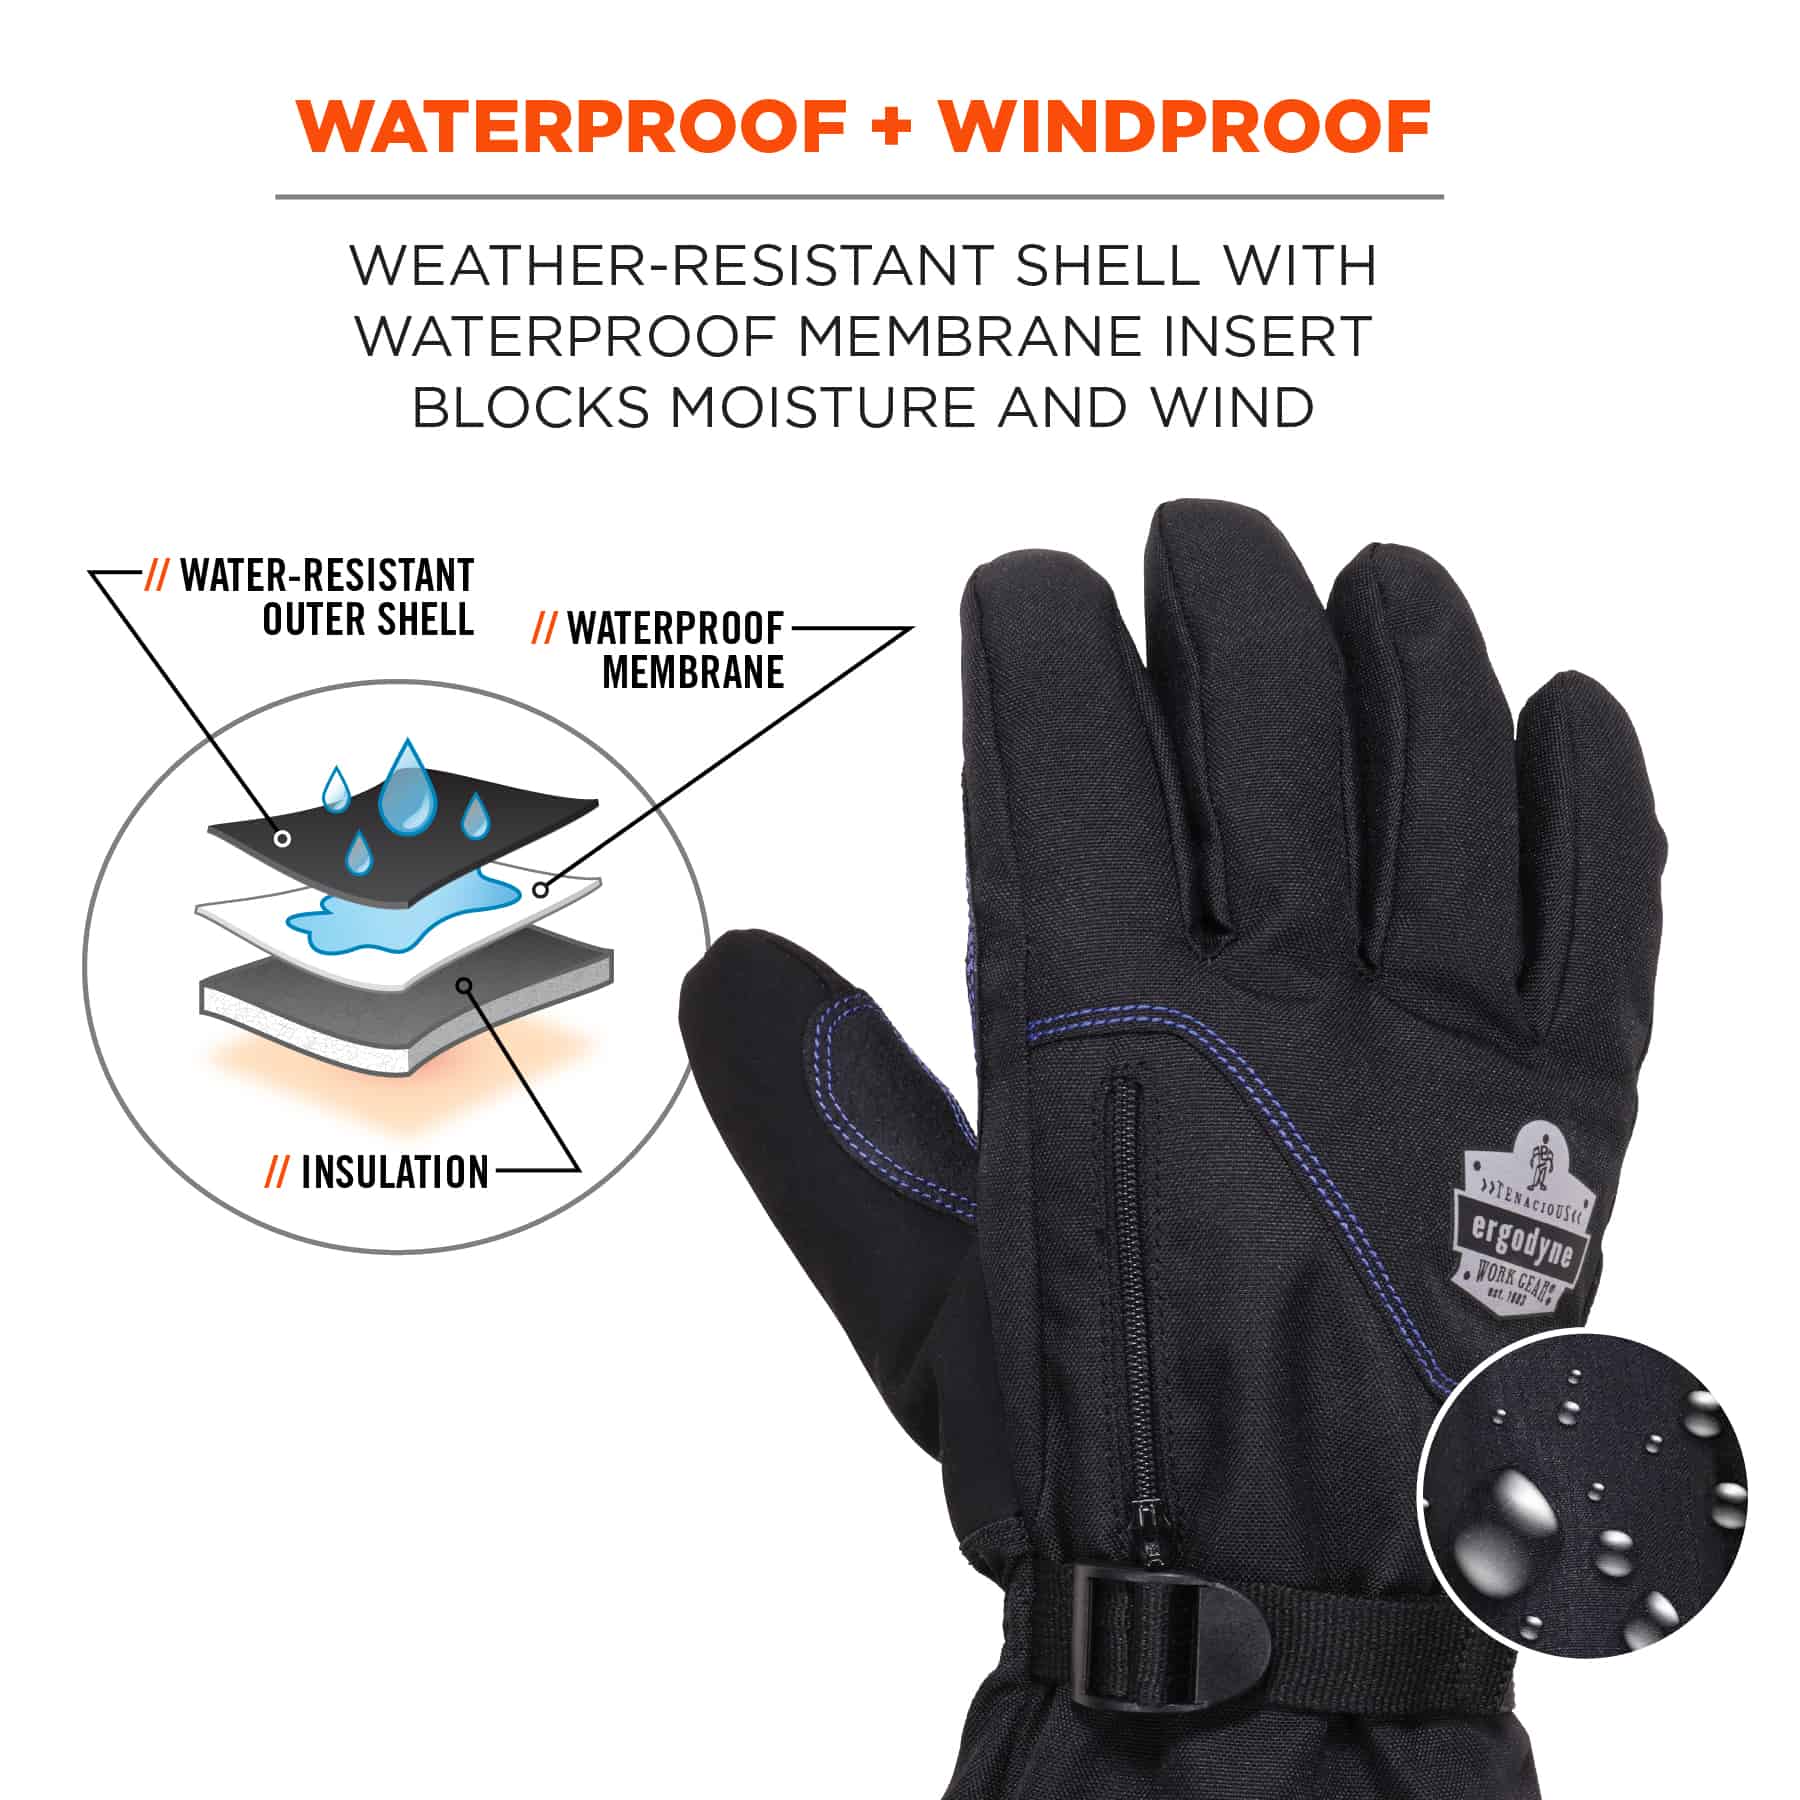 High Visible Winter Thermal Double Lined Black Rubber Work Glove